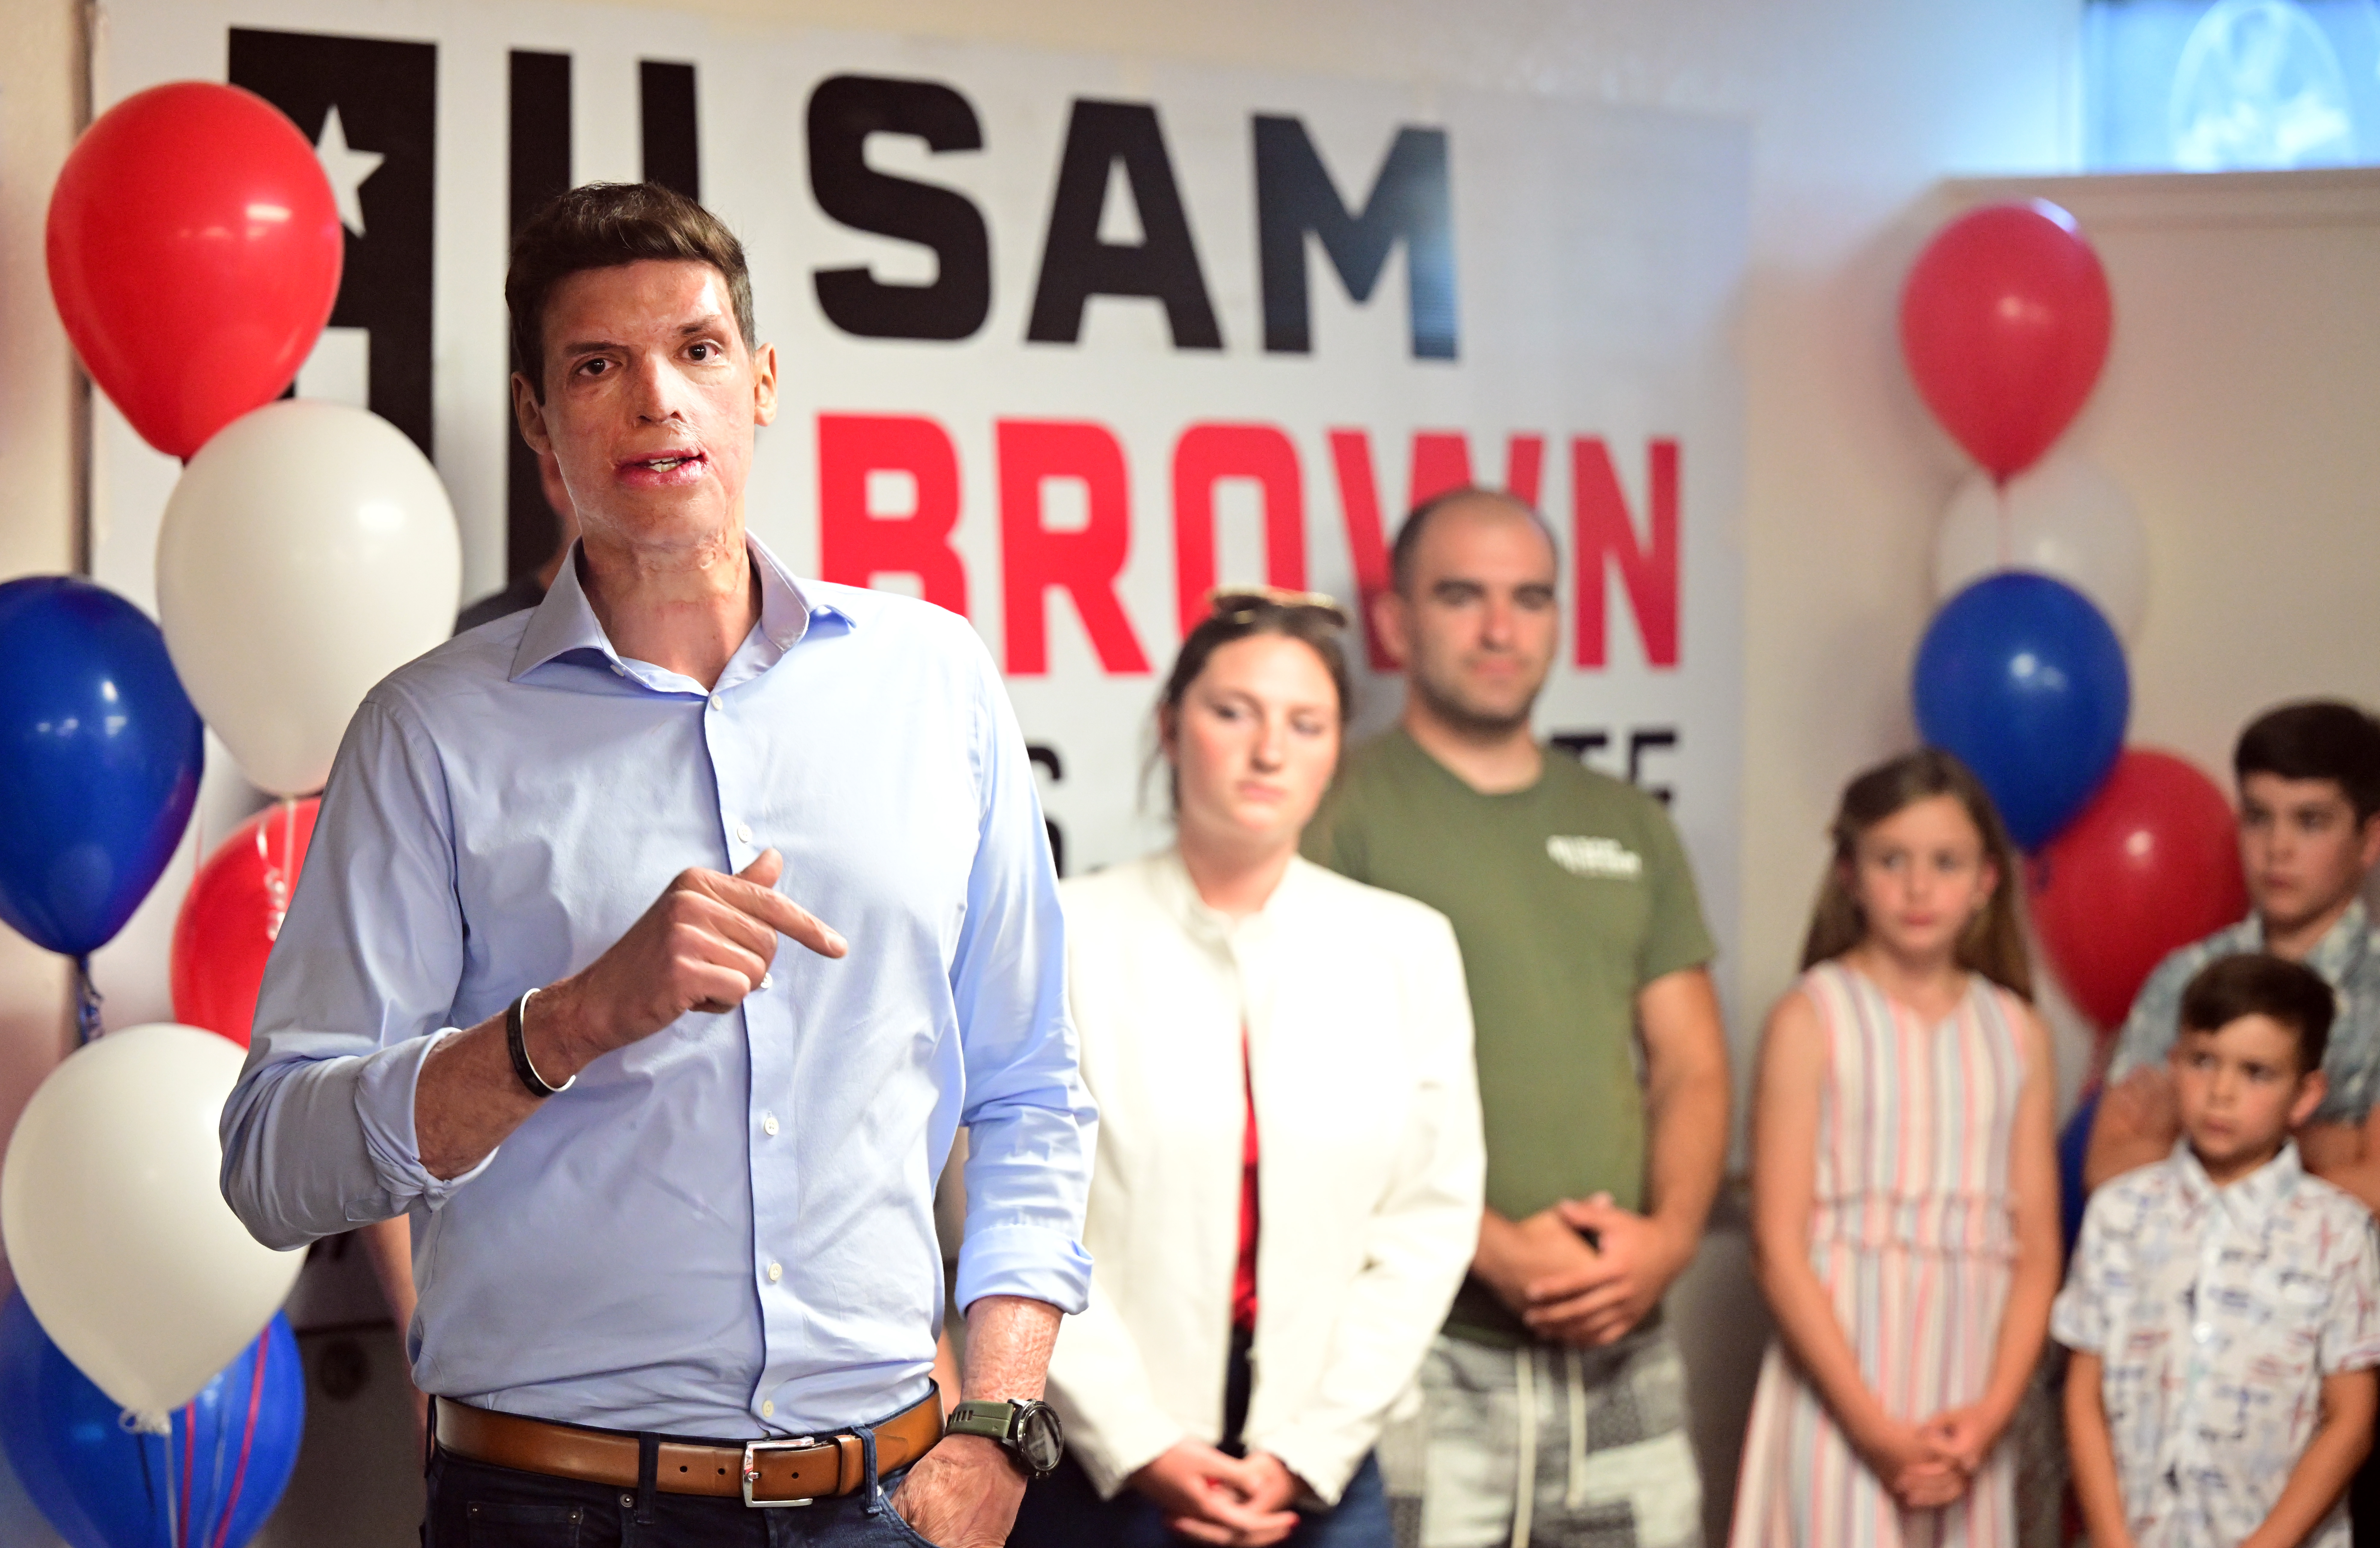 RENO, NV - JUNE 14: Republican U.S. Senate candidate Sam Brown thanks supporters while waiting for election results at his campaign office on June 14, 2022 in Reno, Nevada. Brown is running against former state Attorney General Adam Laxalt in today's GOP primary. (Photo by Josh Edelson/Getty Images)